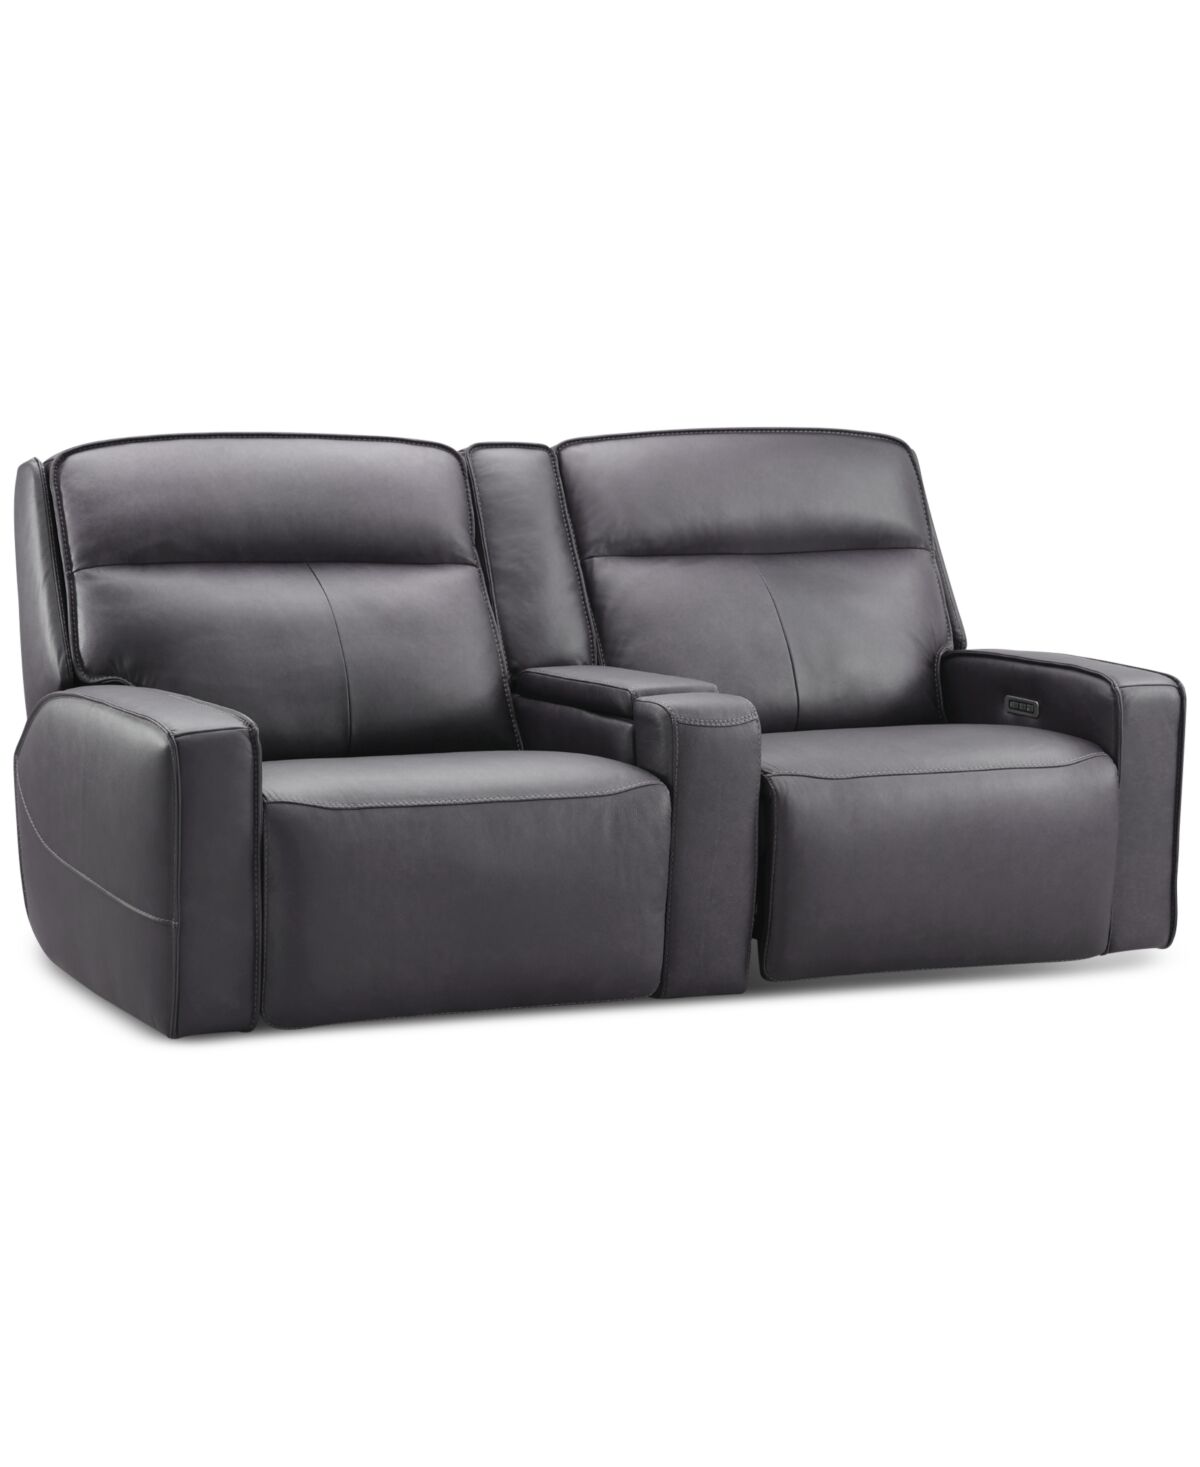 Furniture Dextan Leather 3-Pc. Sofa with 2 Power Recliners and 1 Usb Console, Created for Macy's - Smoke